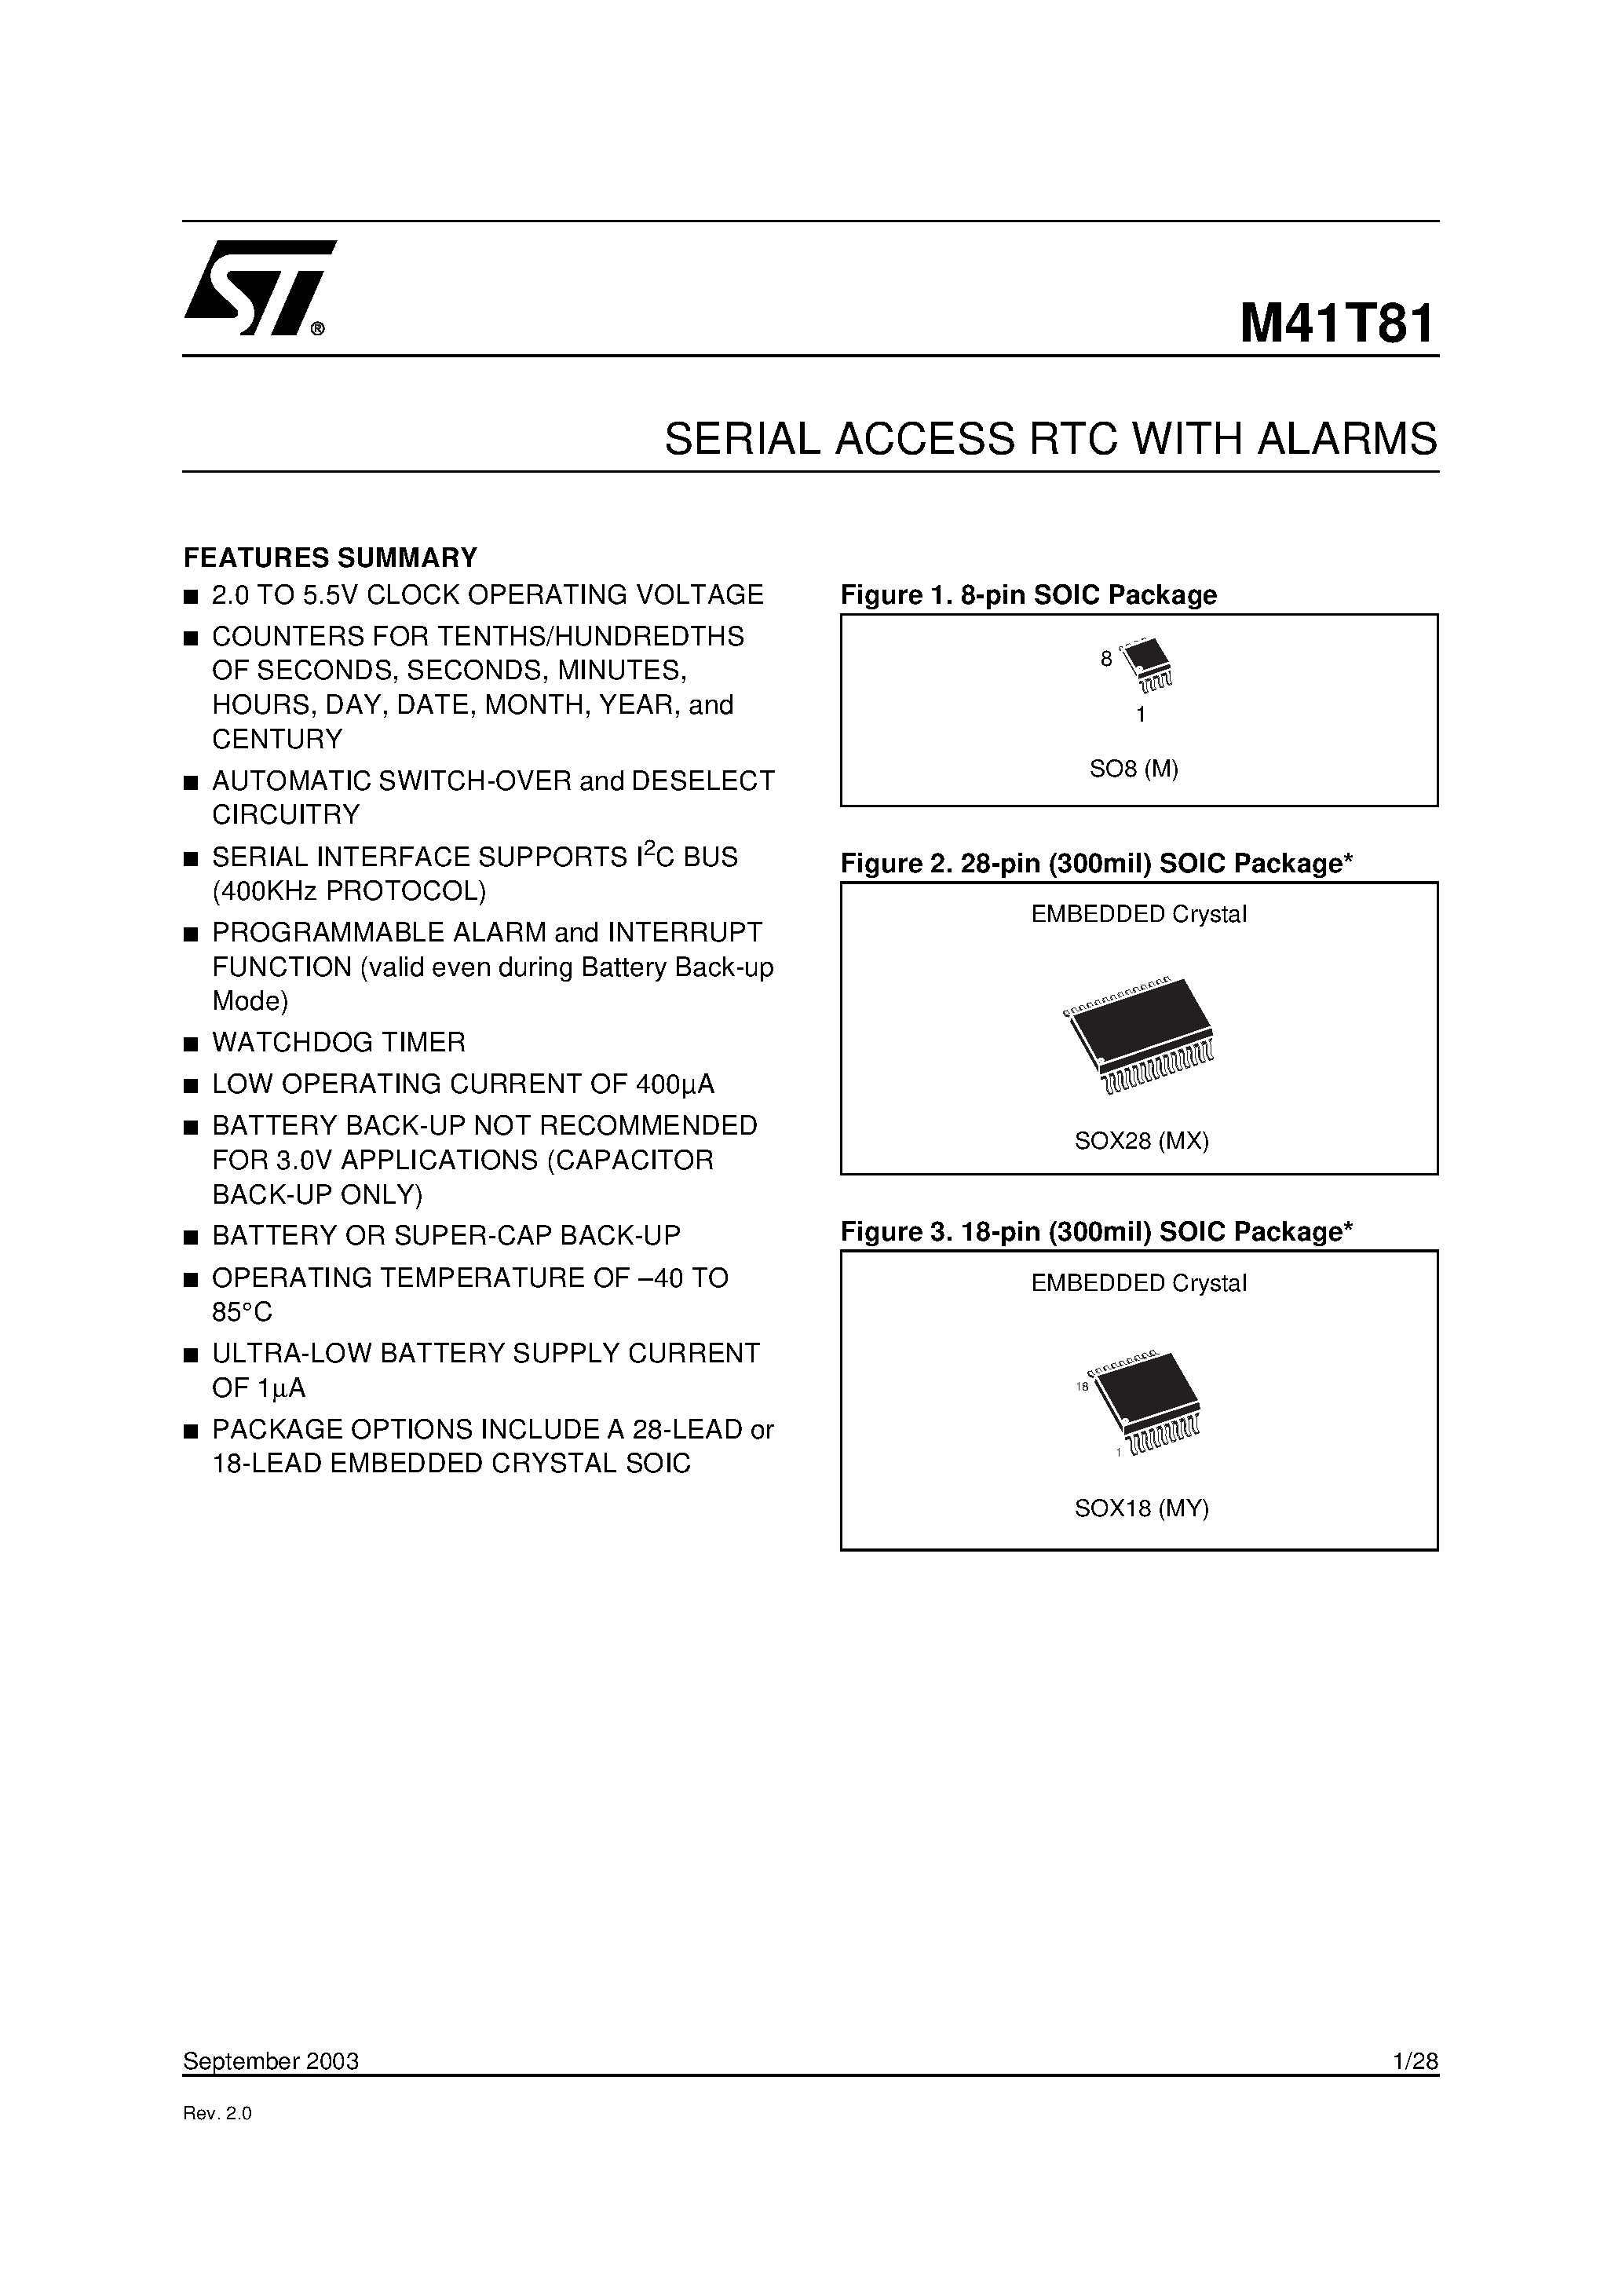 Datasheet M41T81MY - SERIAL ACCESS RTC WITH ALARMS page 1